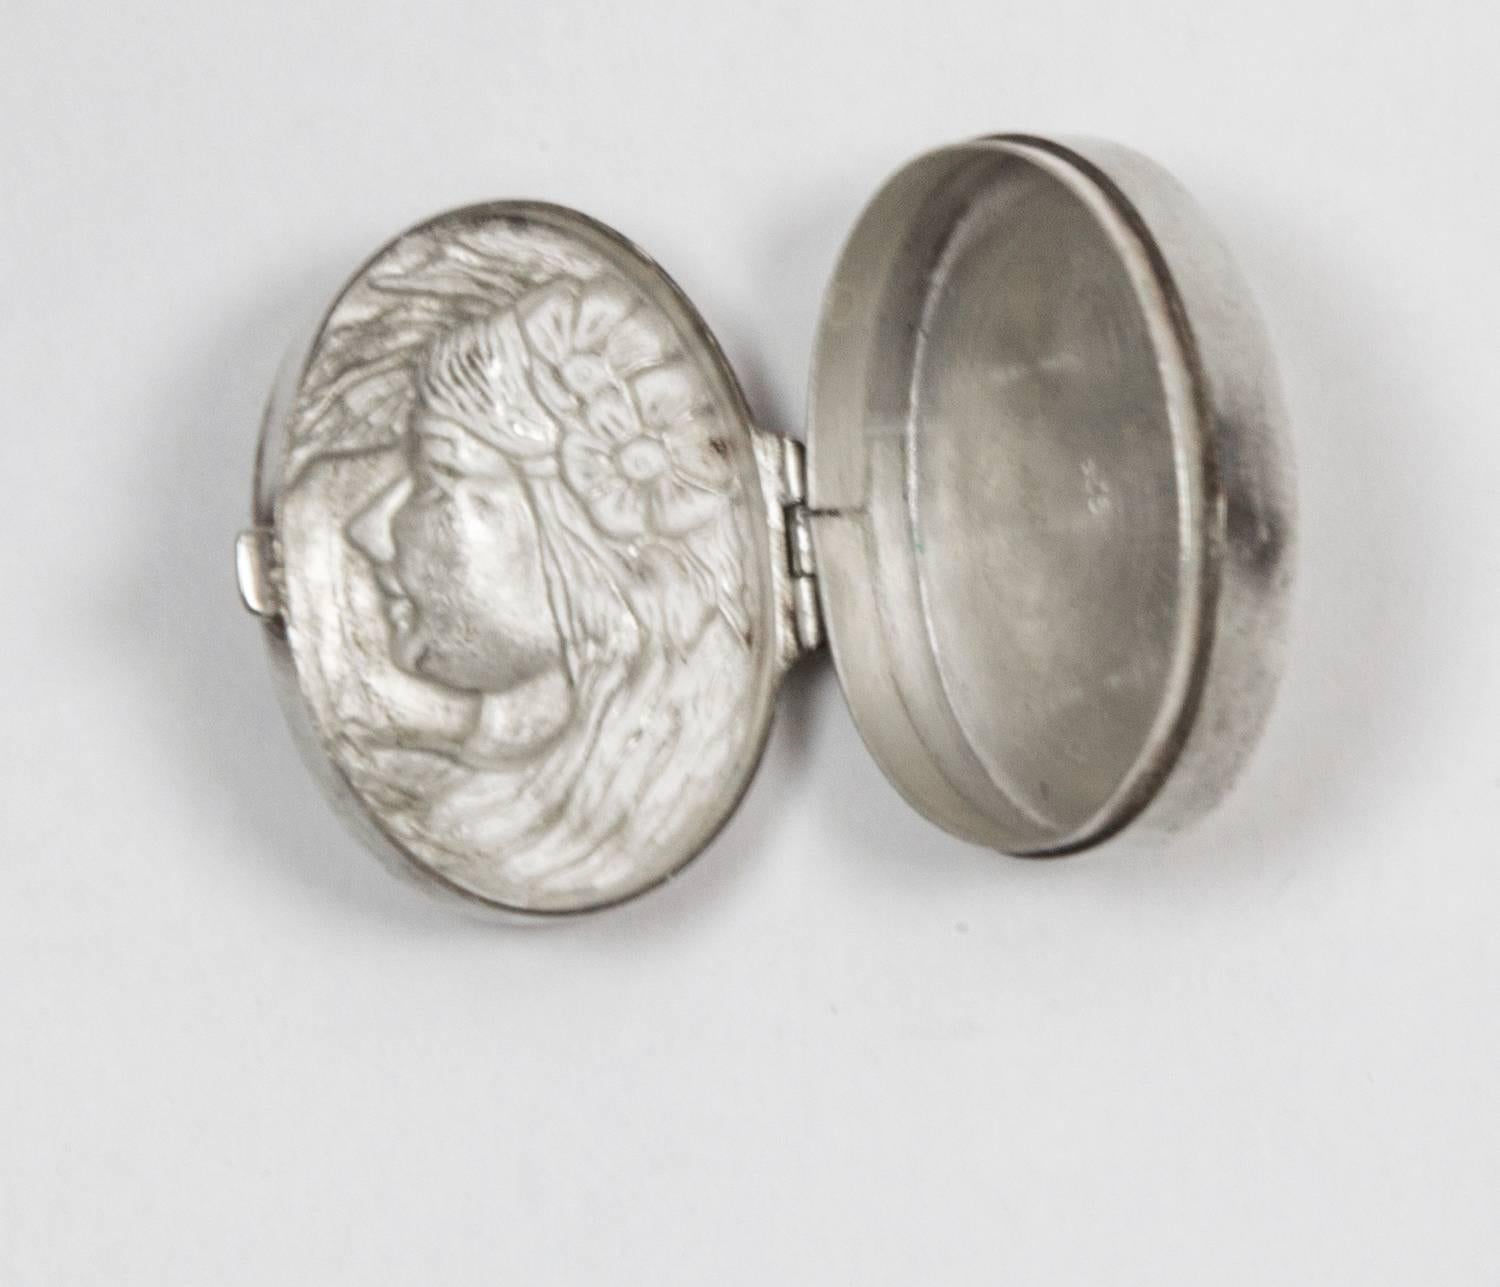 Beautiful figural hinged sterling silver snuff pill box; lid features a female in profile with flowing hair; interior marked: 925. A perfect heirloom gift for that special someone including you!
                 